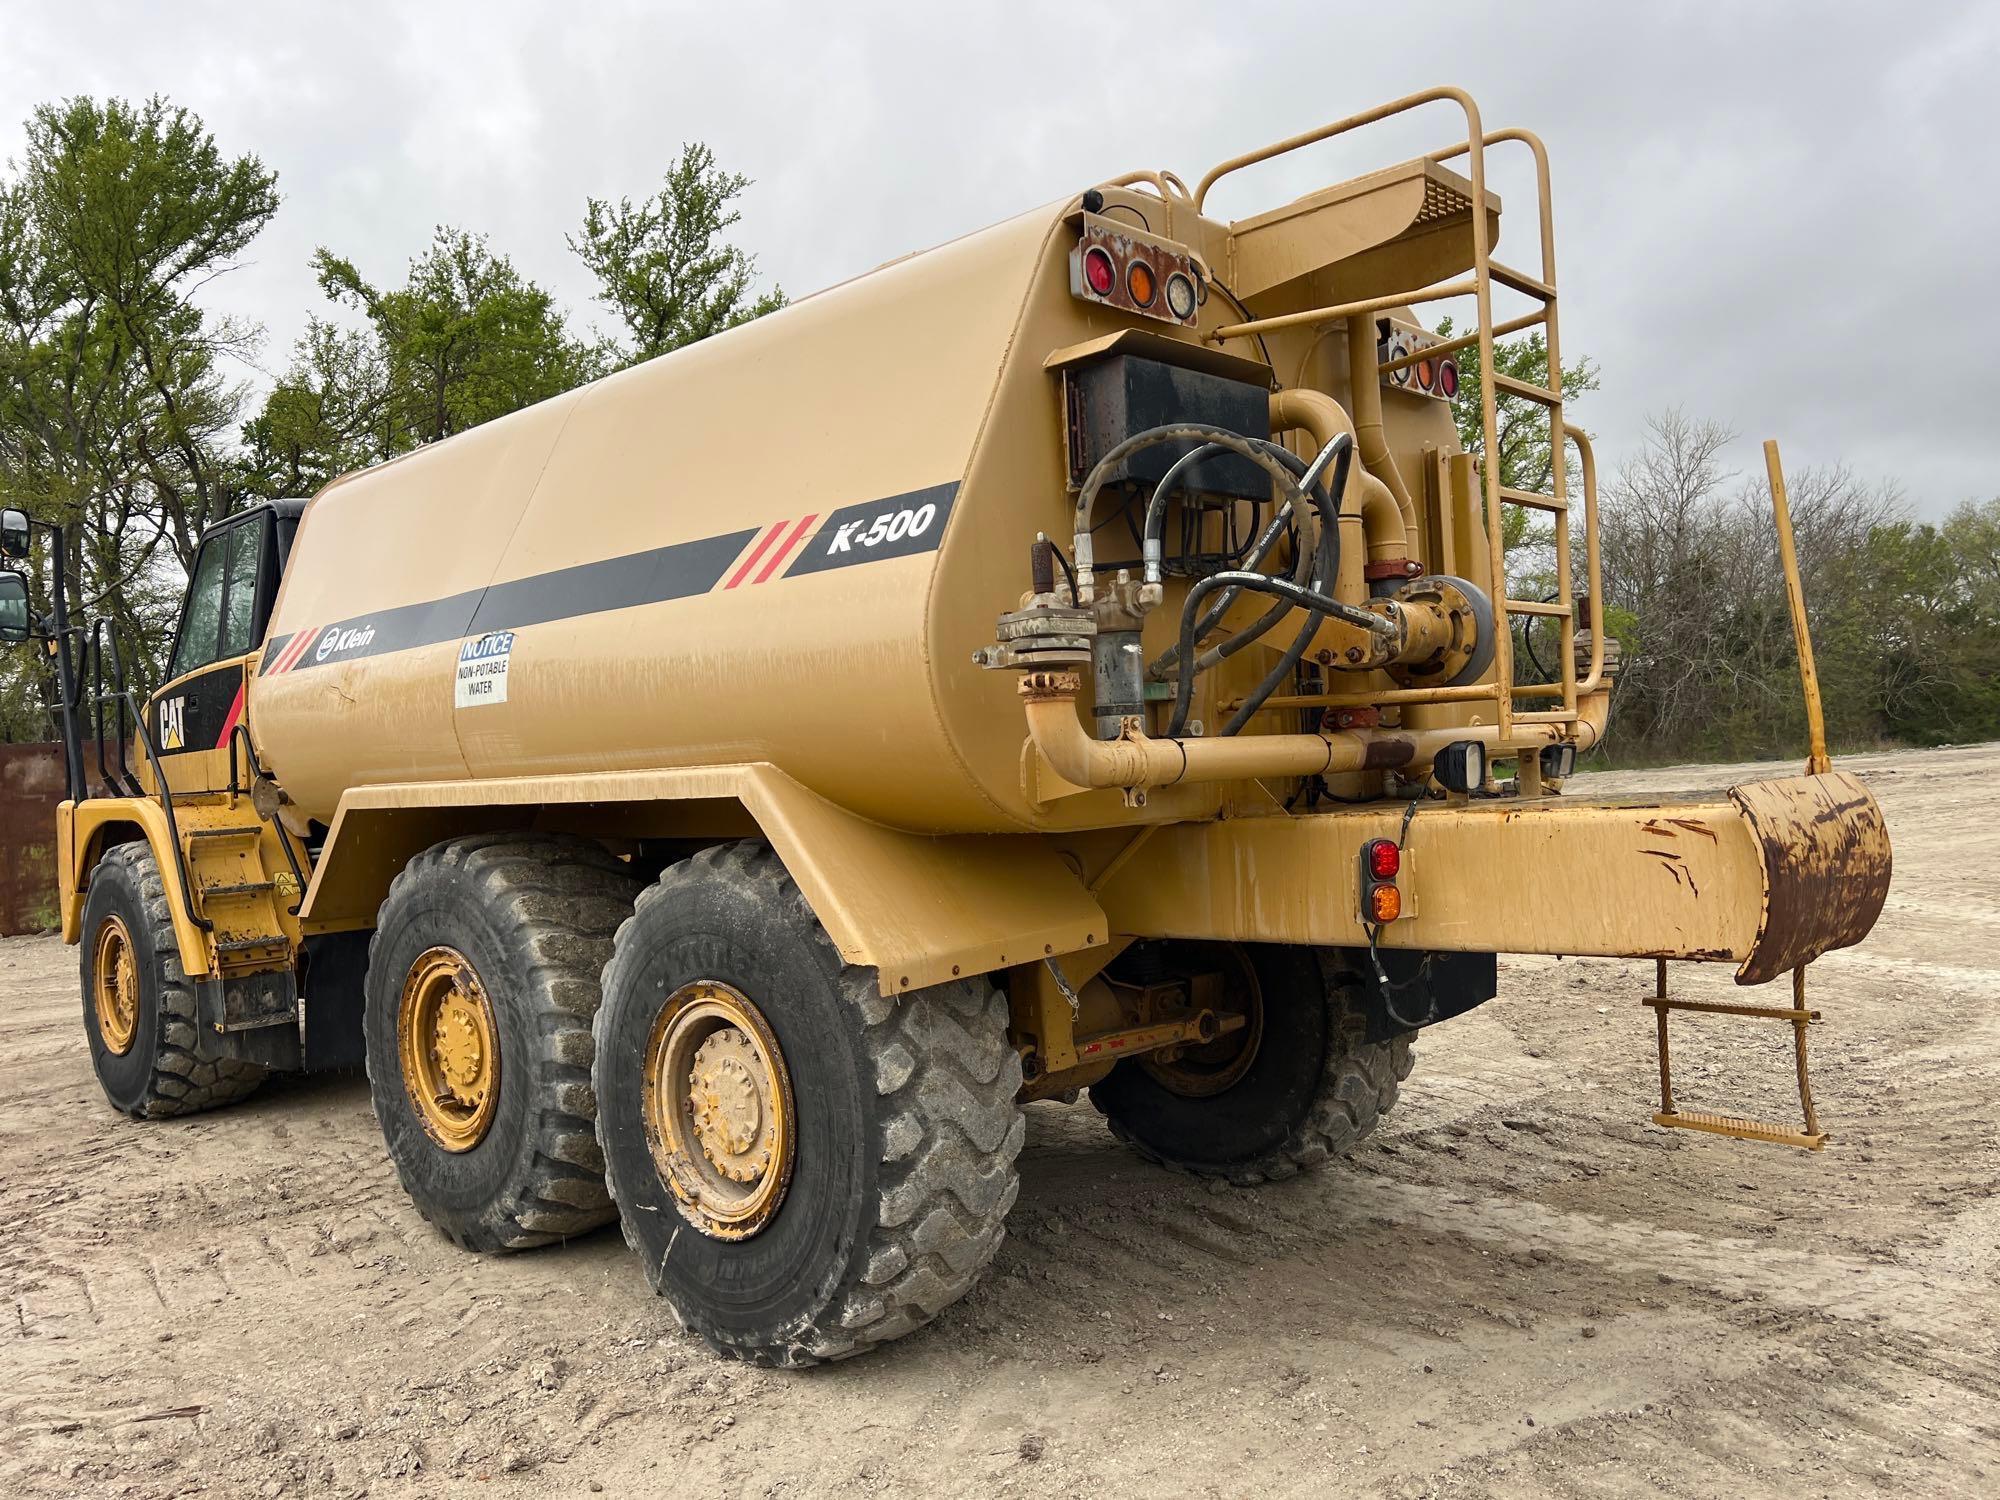 2012 CAT 725 WATER TRUCK SN:CAT00725TB1L02772 6x6, powered by Cat C11 diesel engine, equipped with